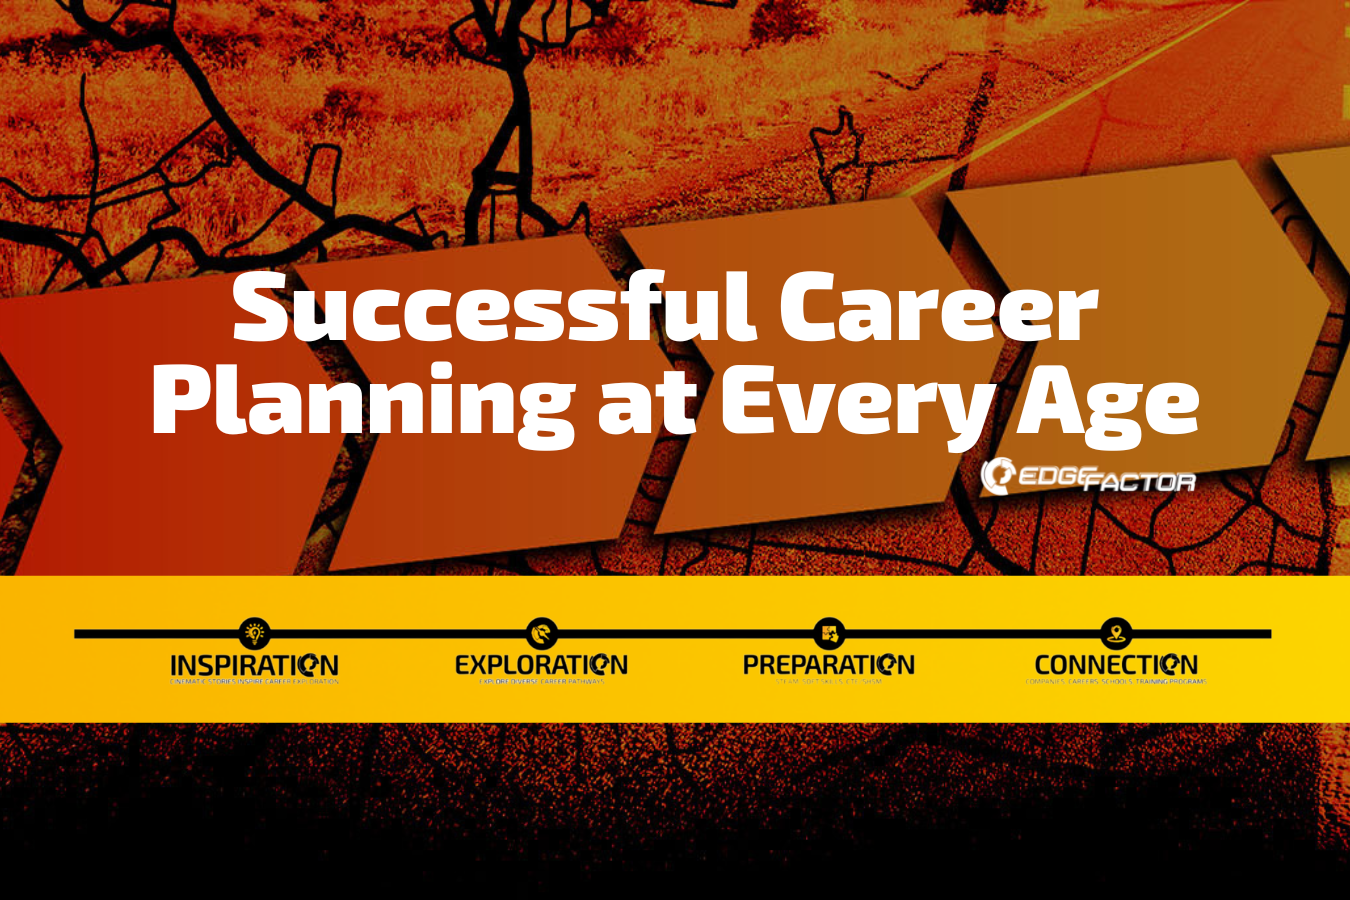 Successful Career Planning at Every Age with Edge Factor 